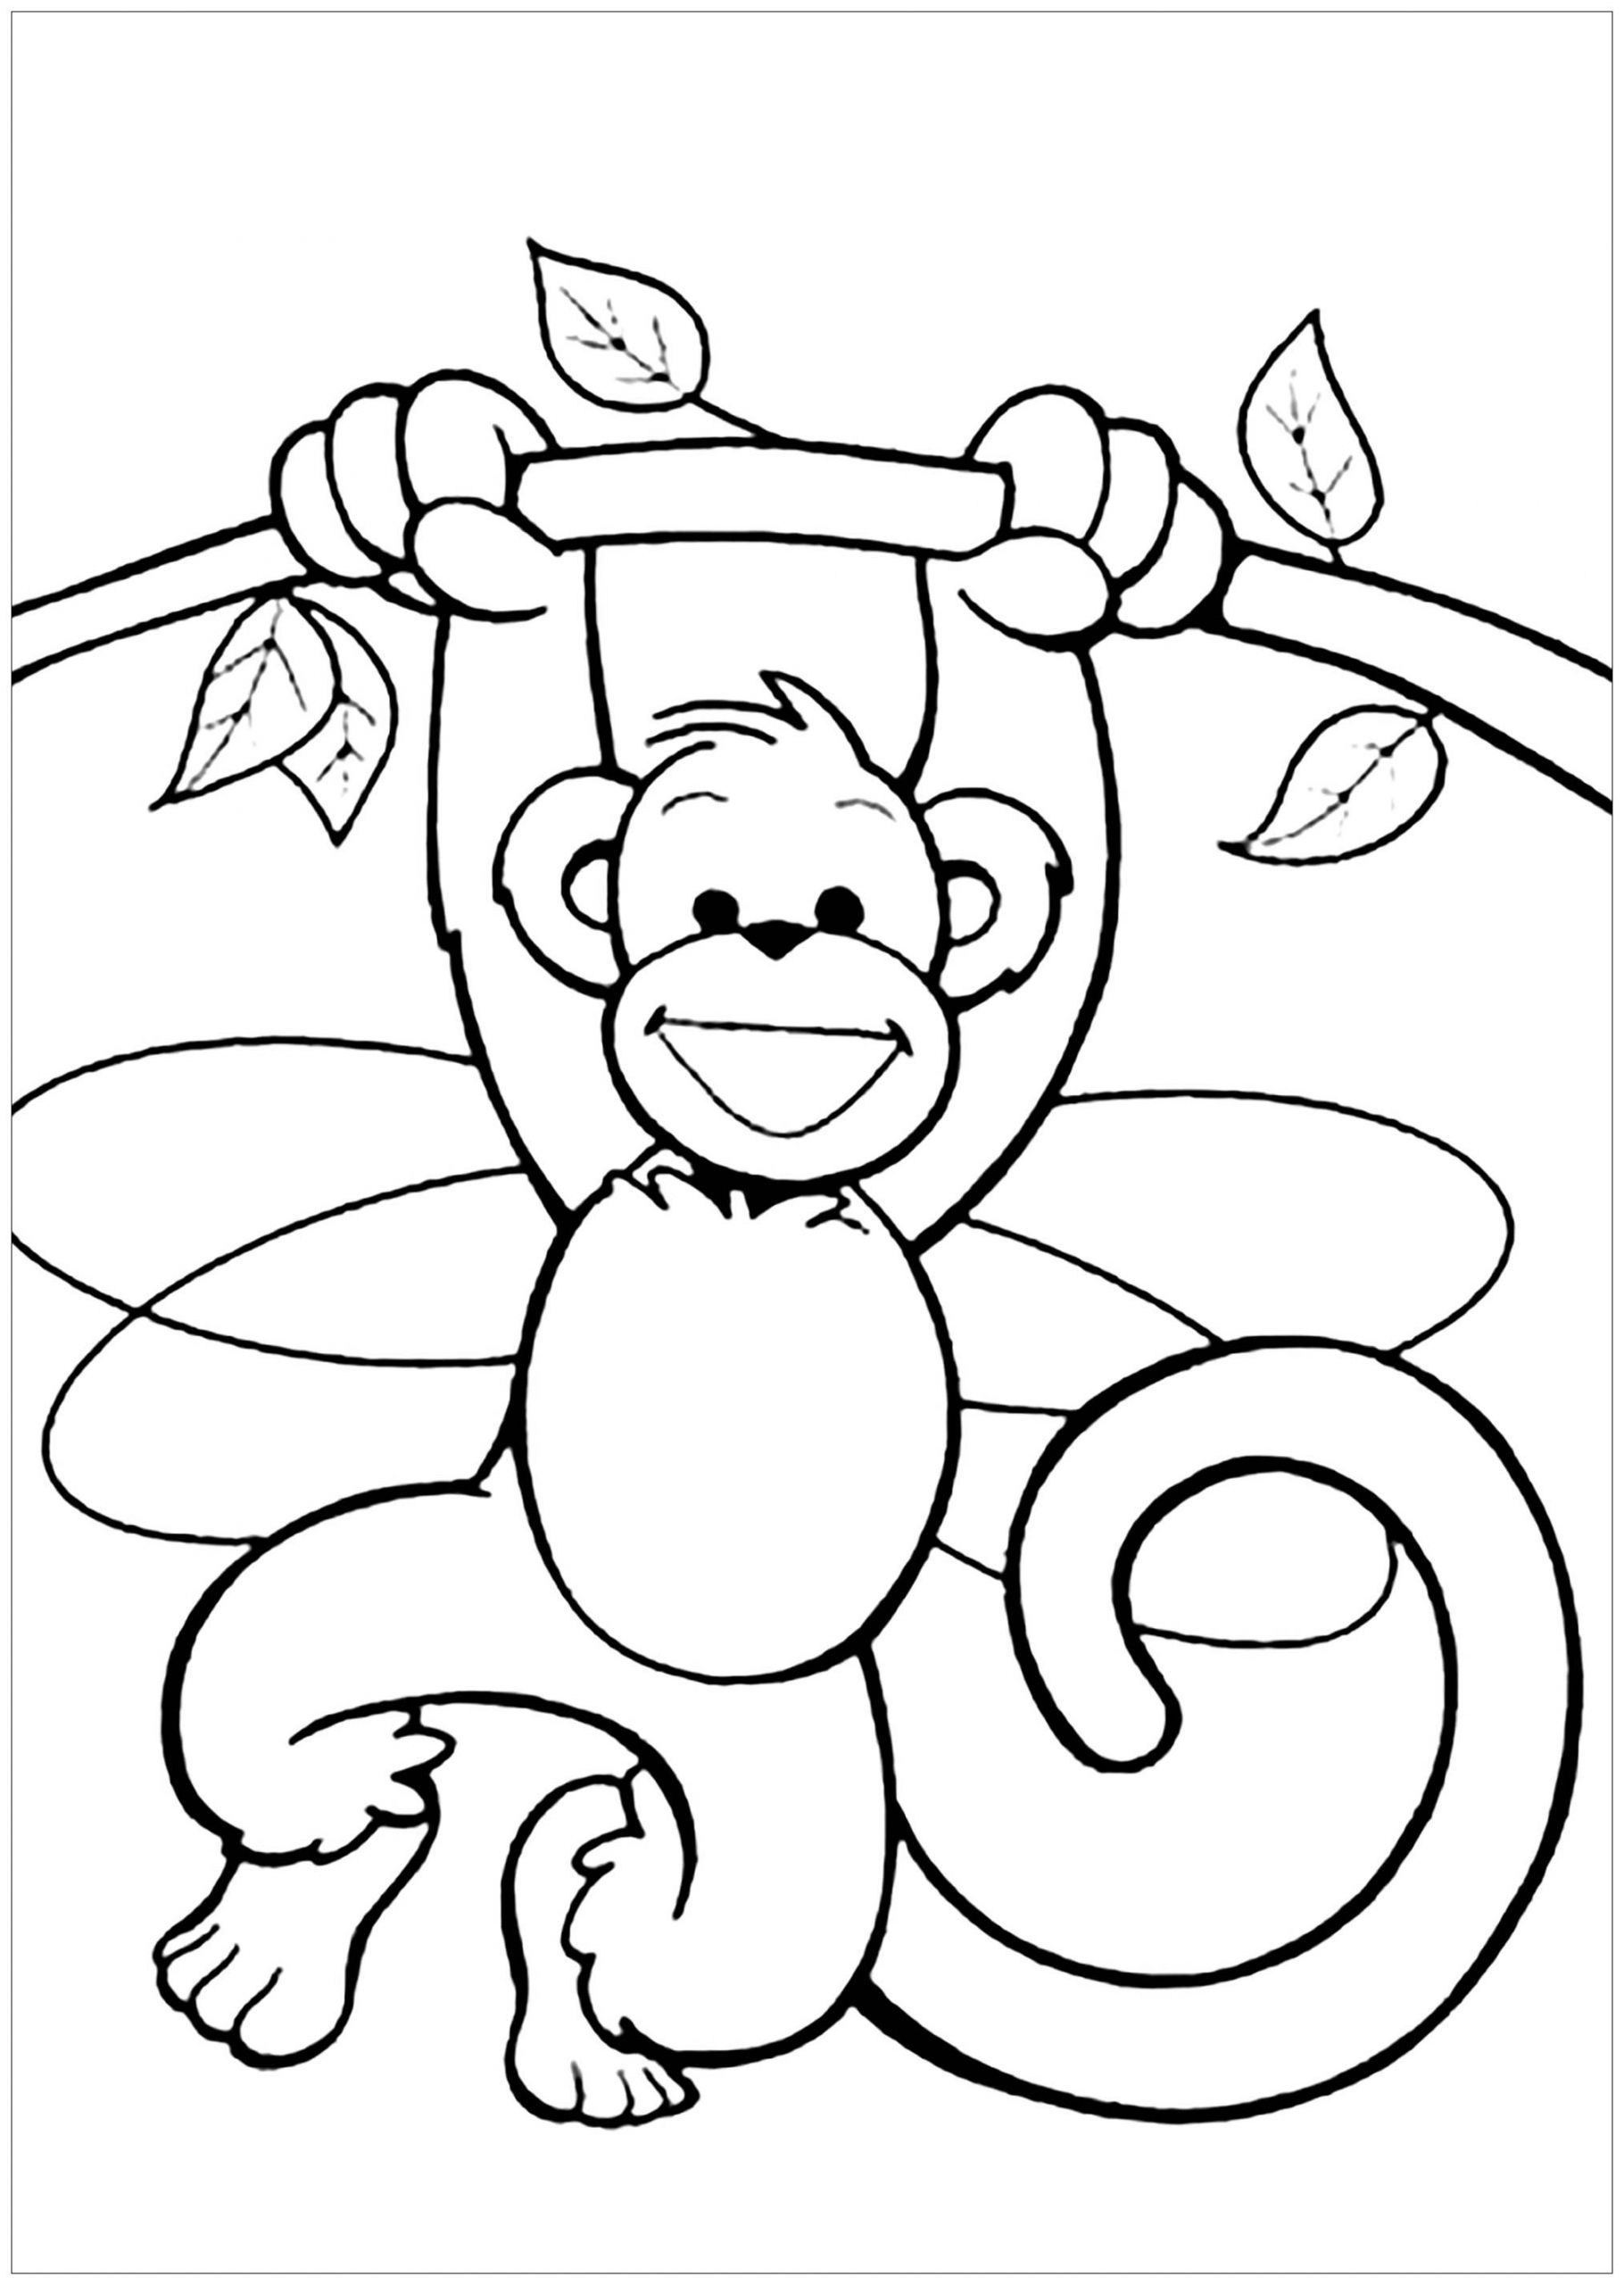 Coloring-Pages-Kids
 Monkeys to for free Monkeys Kids Coloring Pages